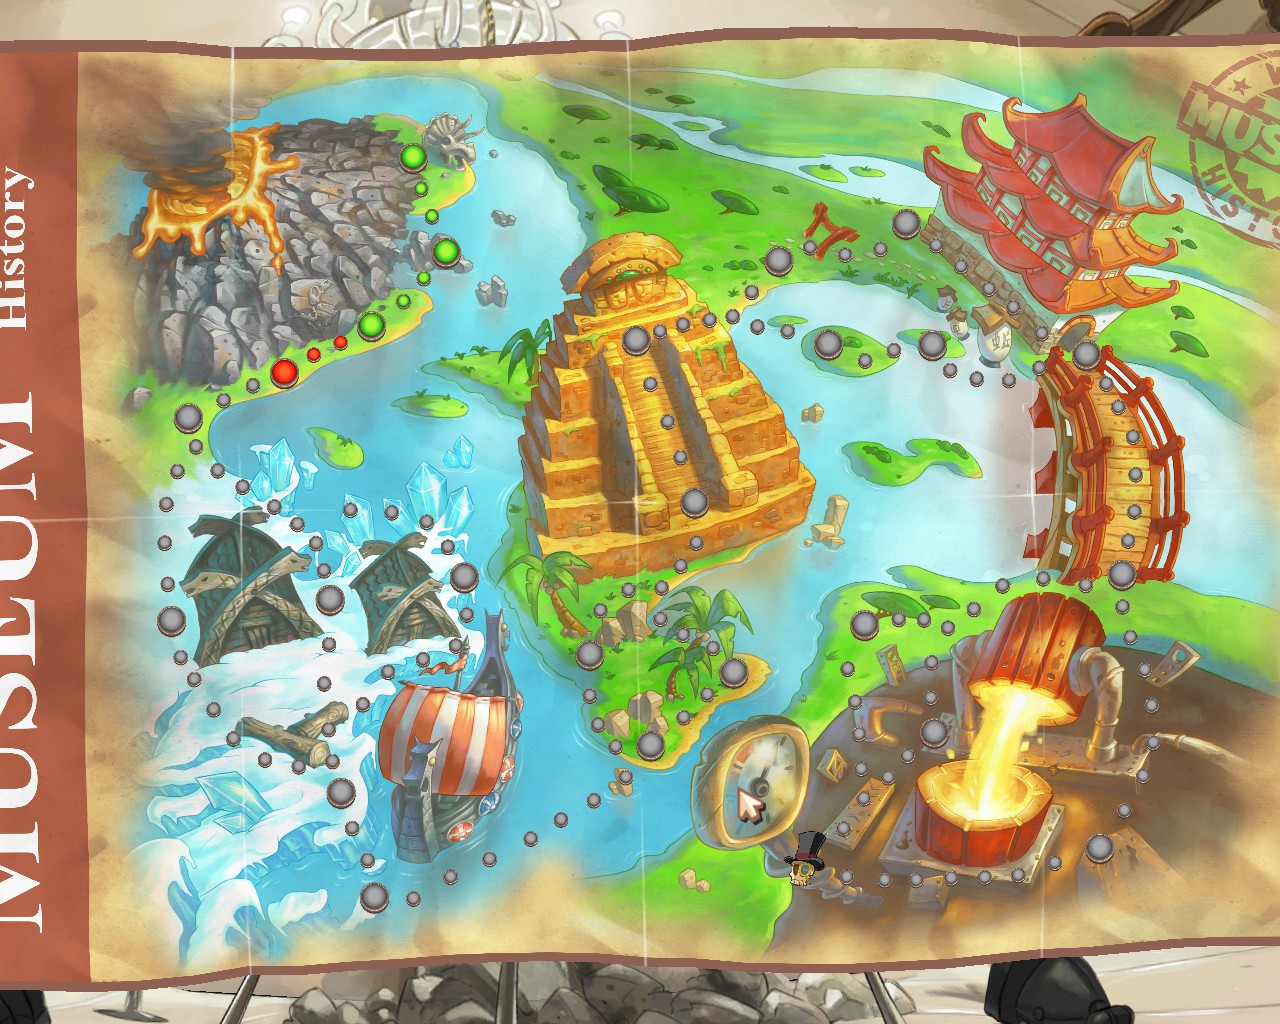 worms-clan-wars-story-mode-map-mapa-campaign-campanha